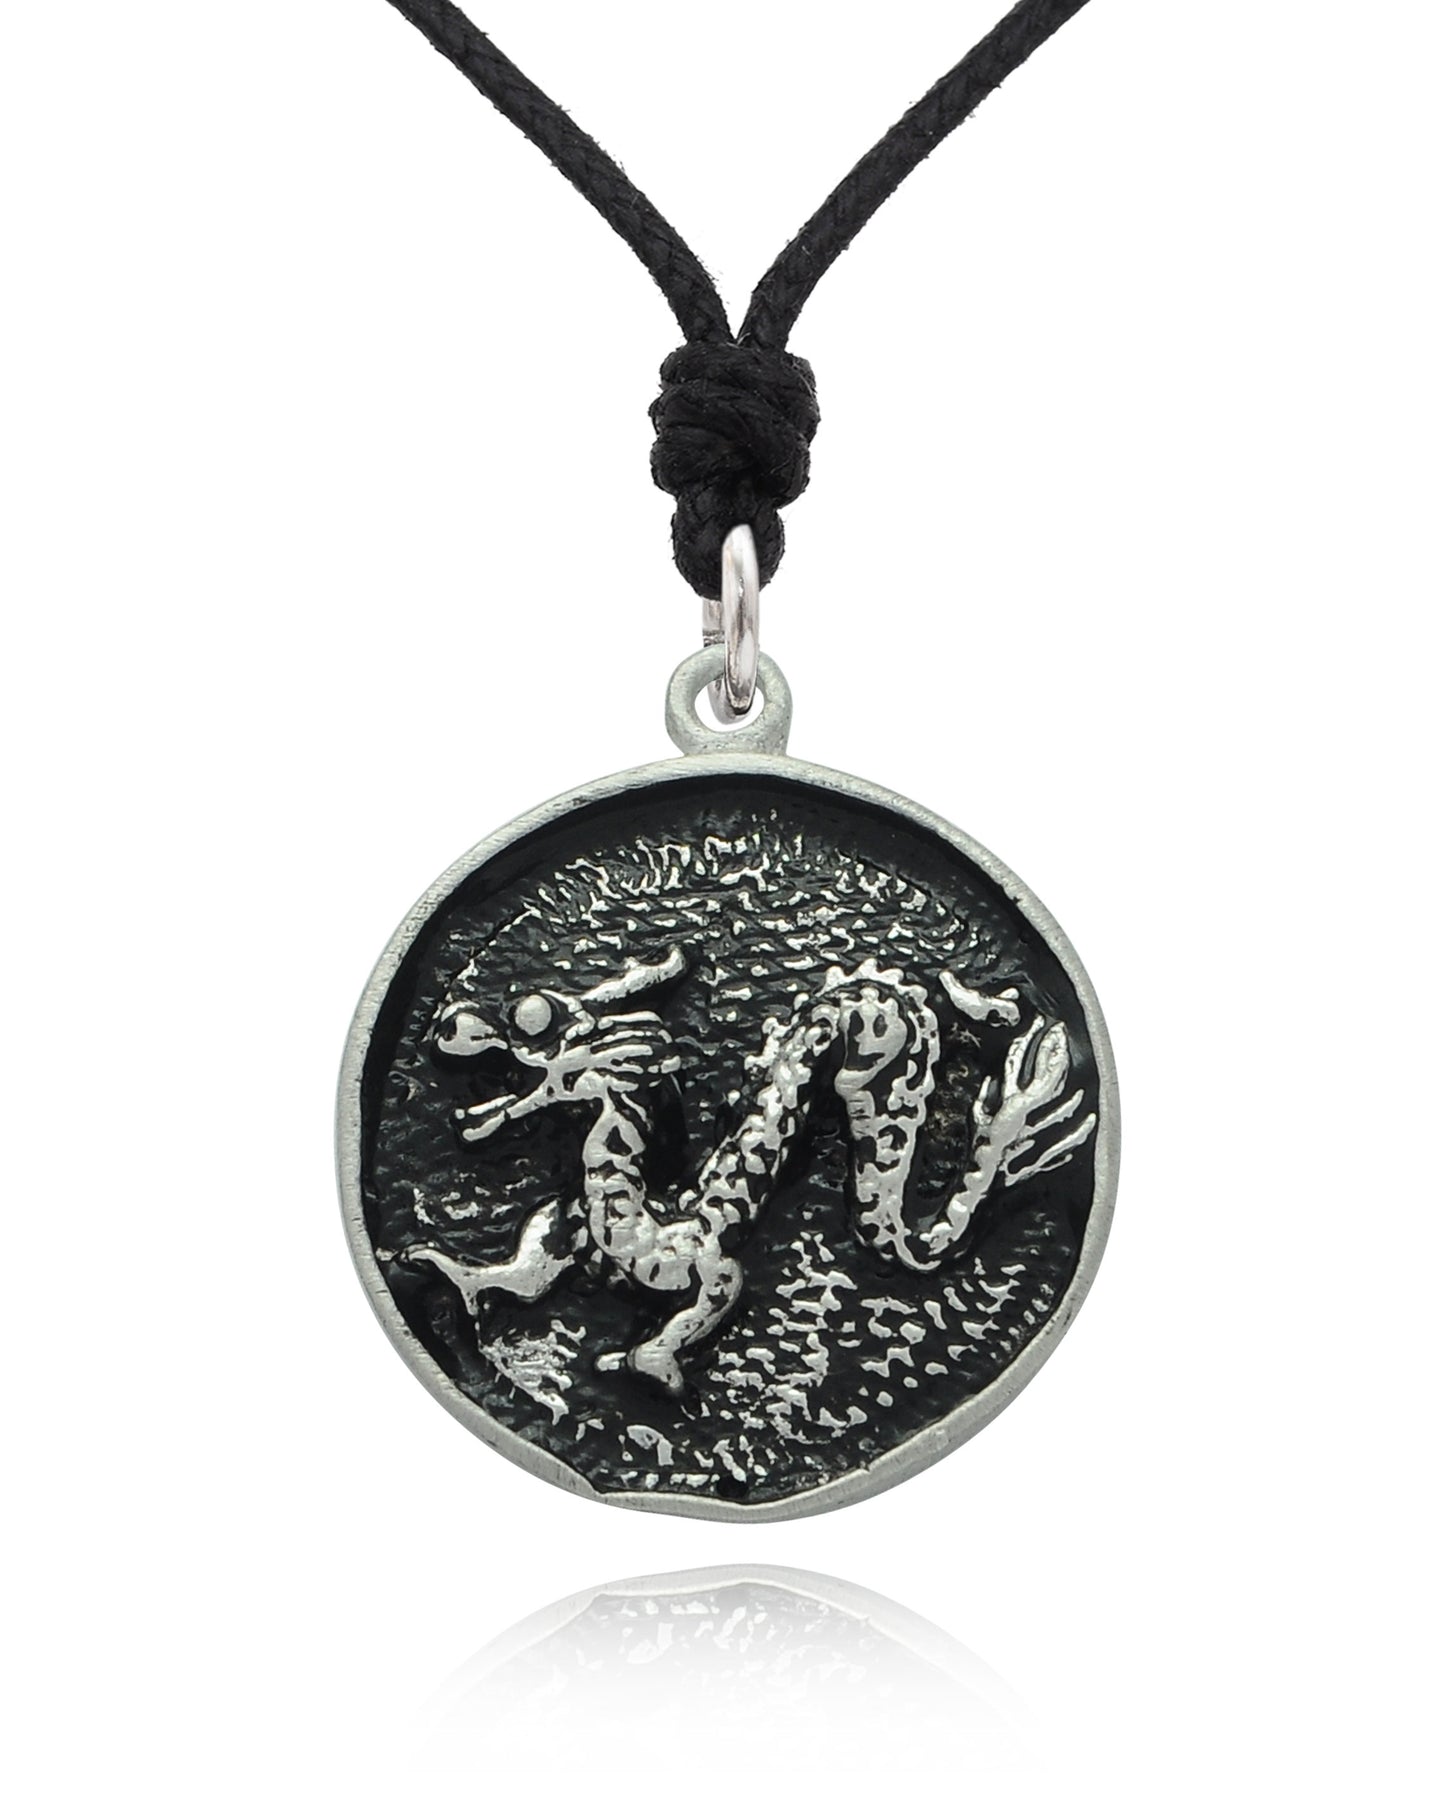 Stylish Year of the Dragon Silver Pewter Charm Necklace Pendant Jewelry With Cotton Cord